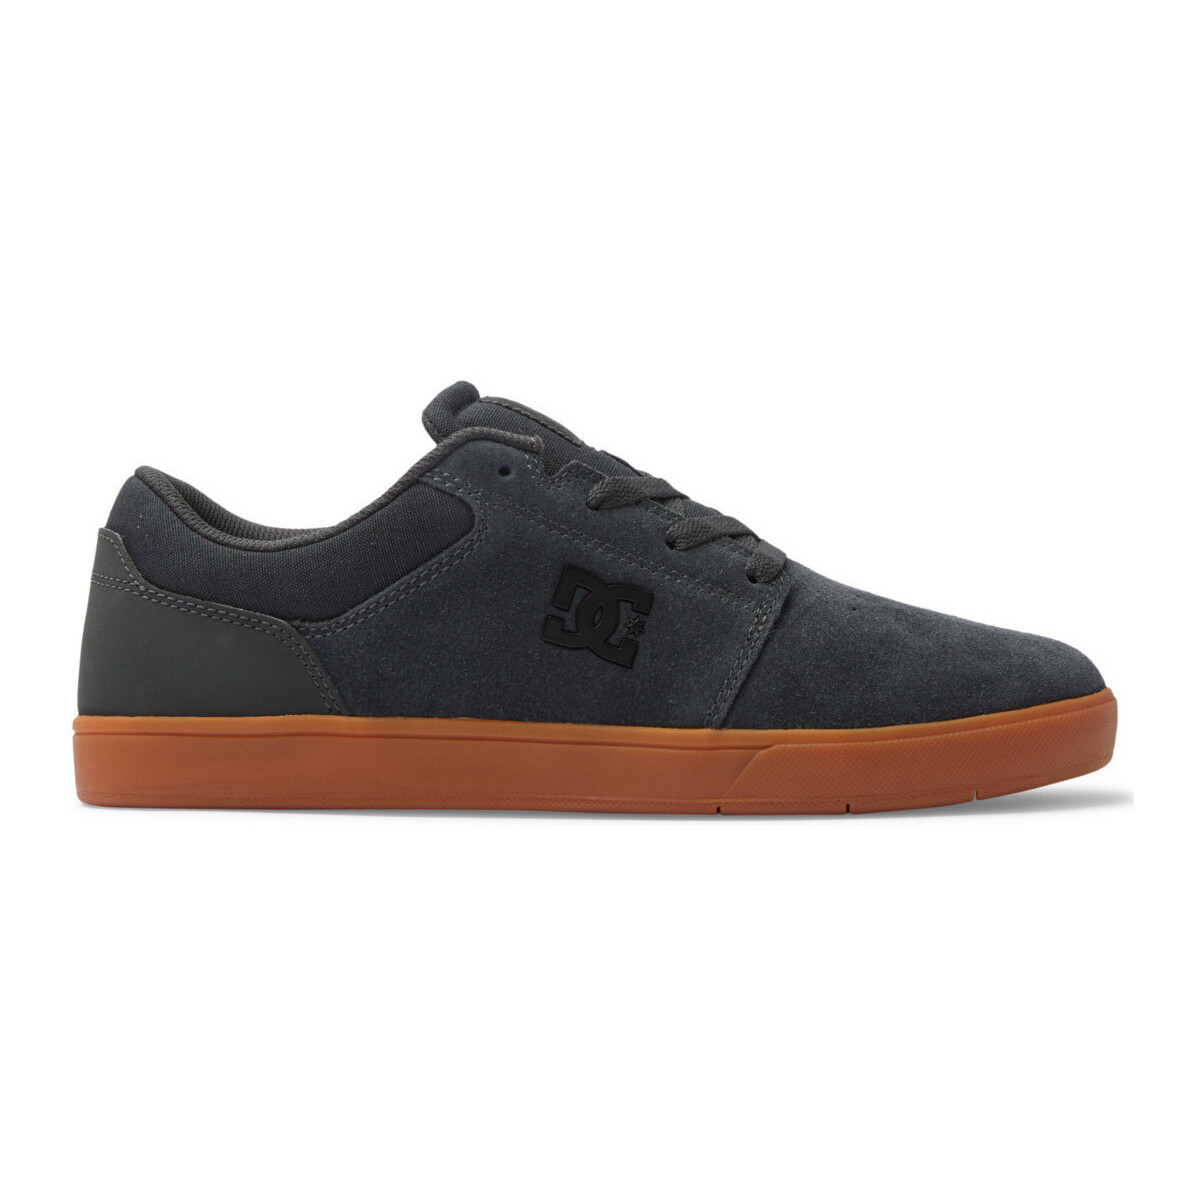 Sneakers DC Shoes Crisis 2